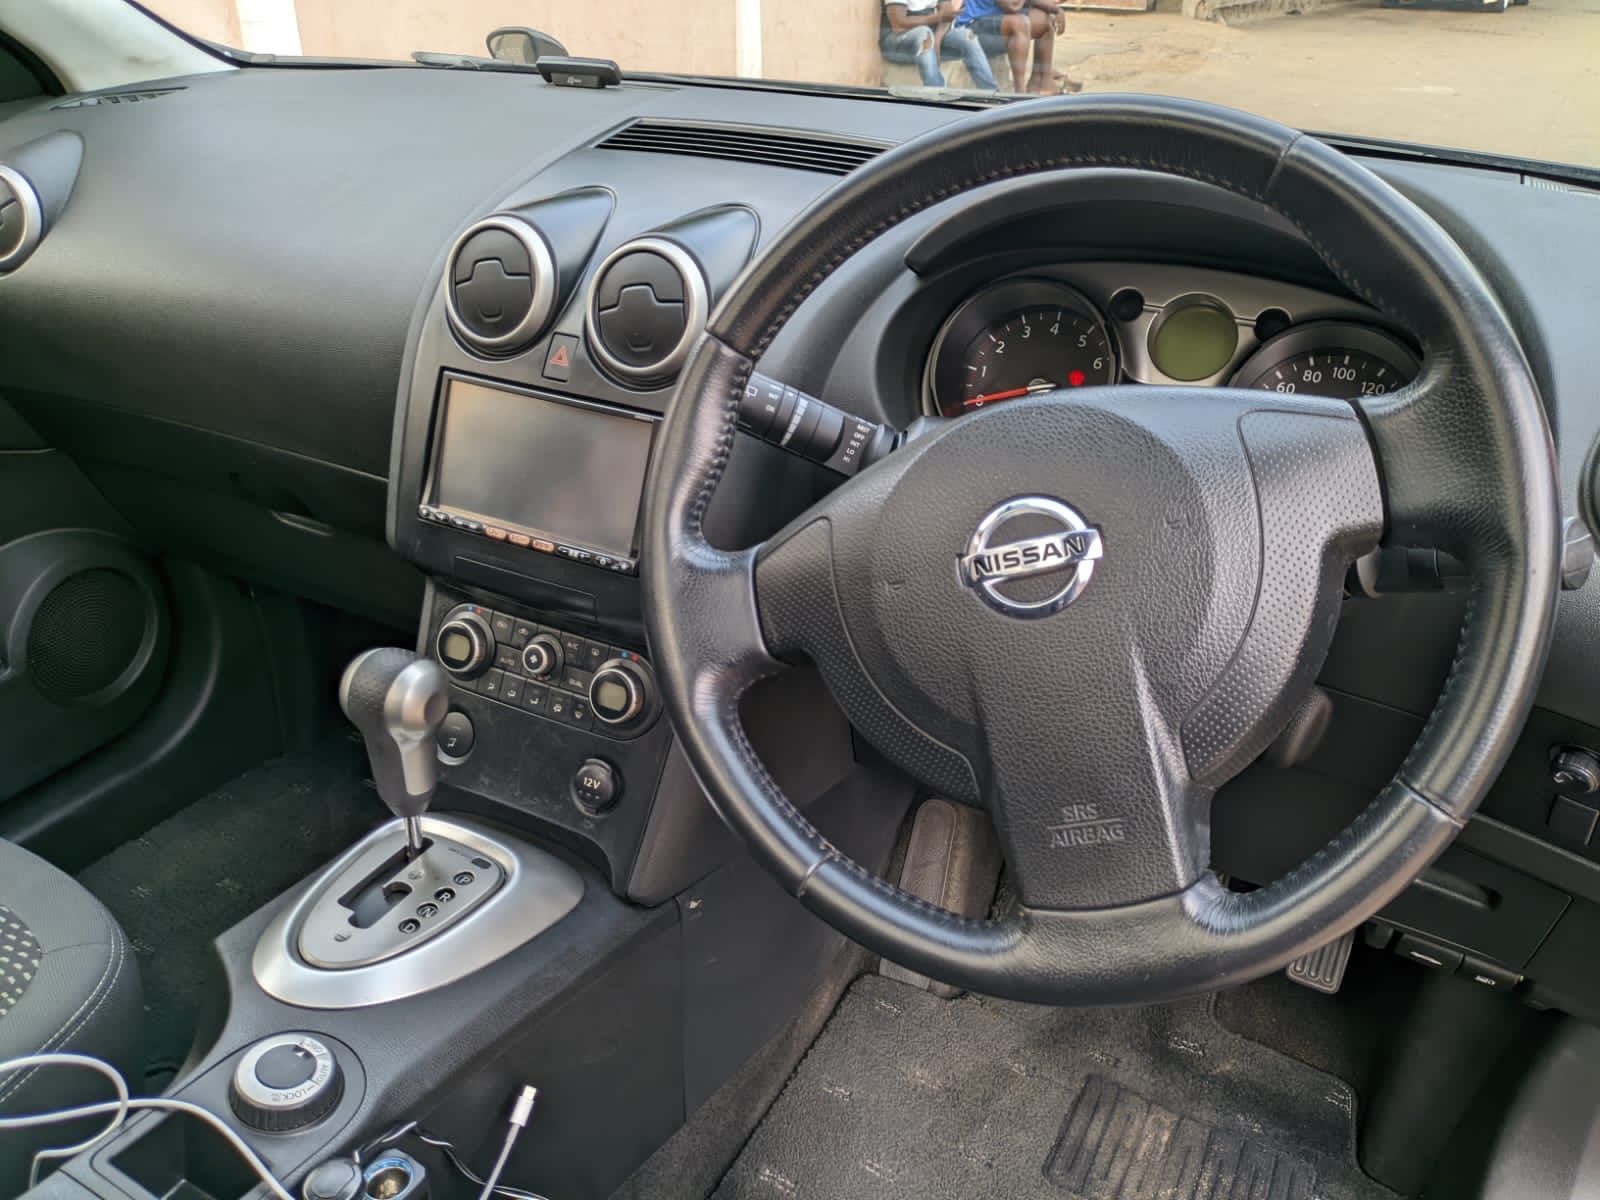 Nissan Dualis For Sale in Maputo at Best Prices | UsedCars.co.mz